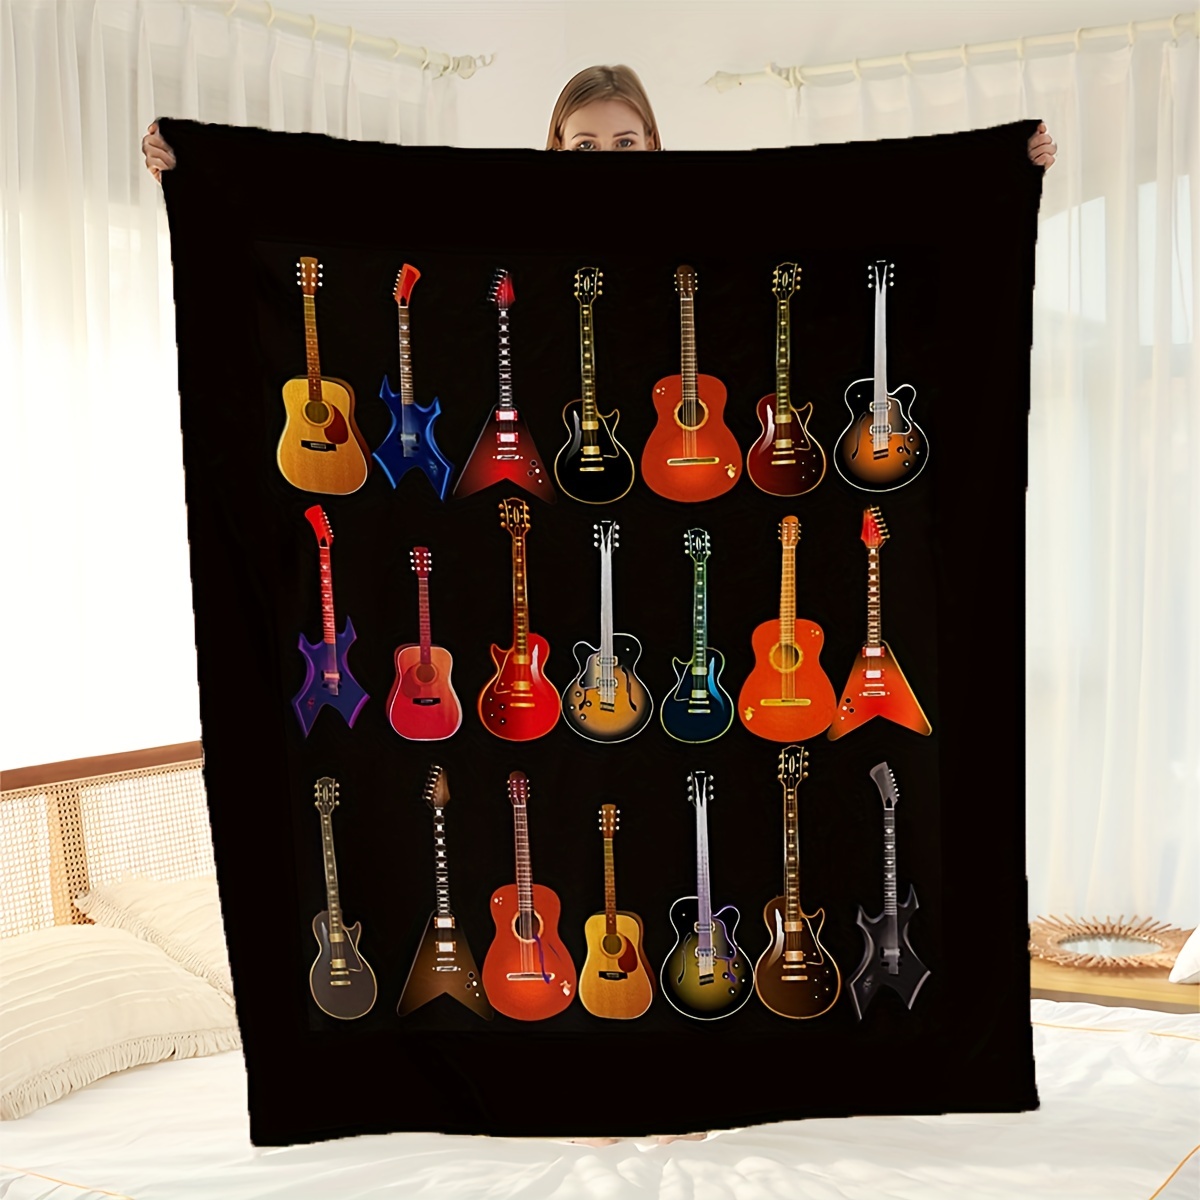 

1pc Guitar Patterned Flannel Blanket, Soft Warm Throw Blanket Nap Blanket For Couch Sofa Office Bed Camping Travel